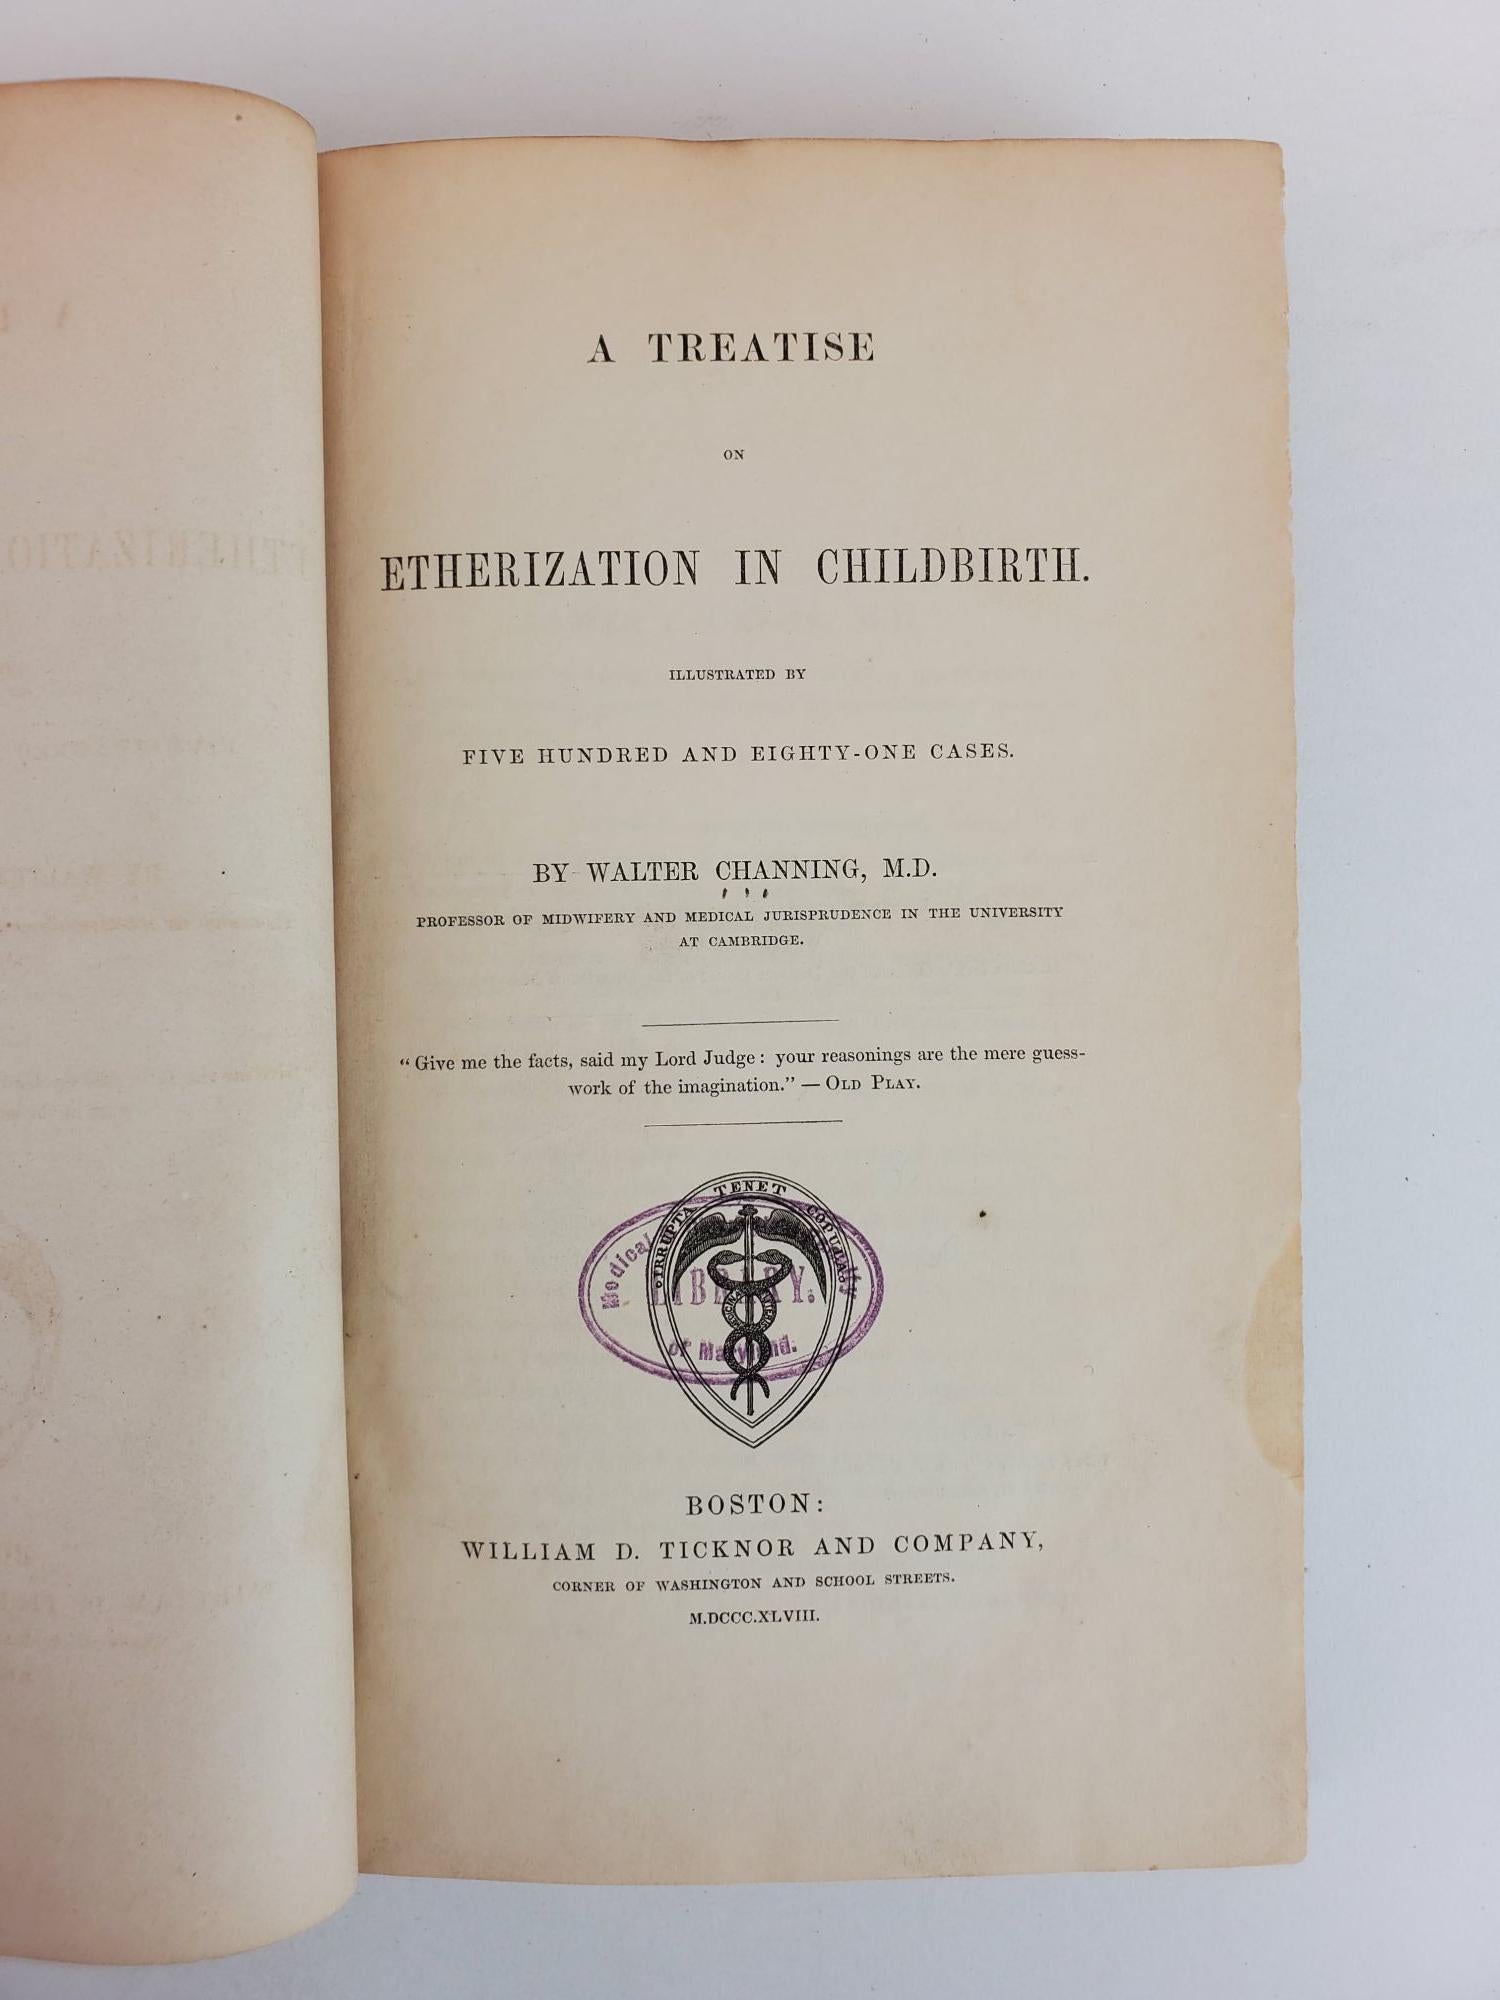 Product Image for A TREATISE ON ETHERIZATION IN CHILDBIRTH